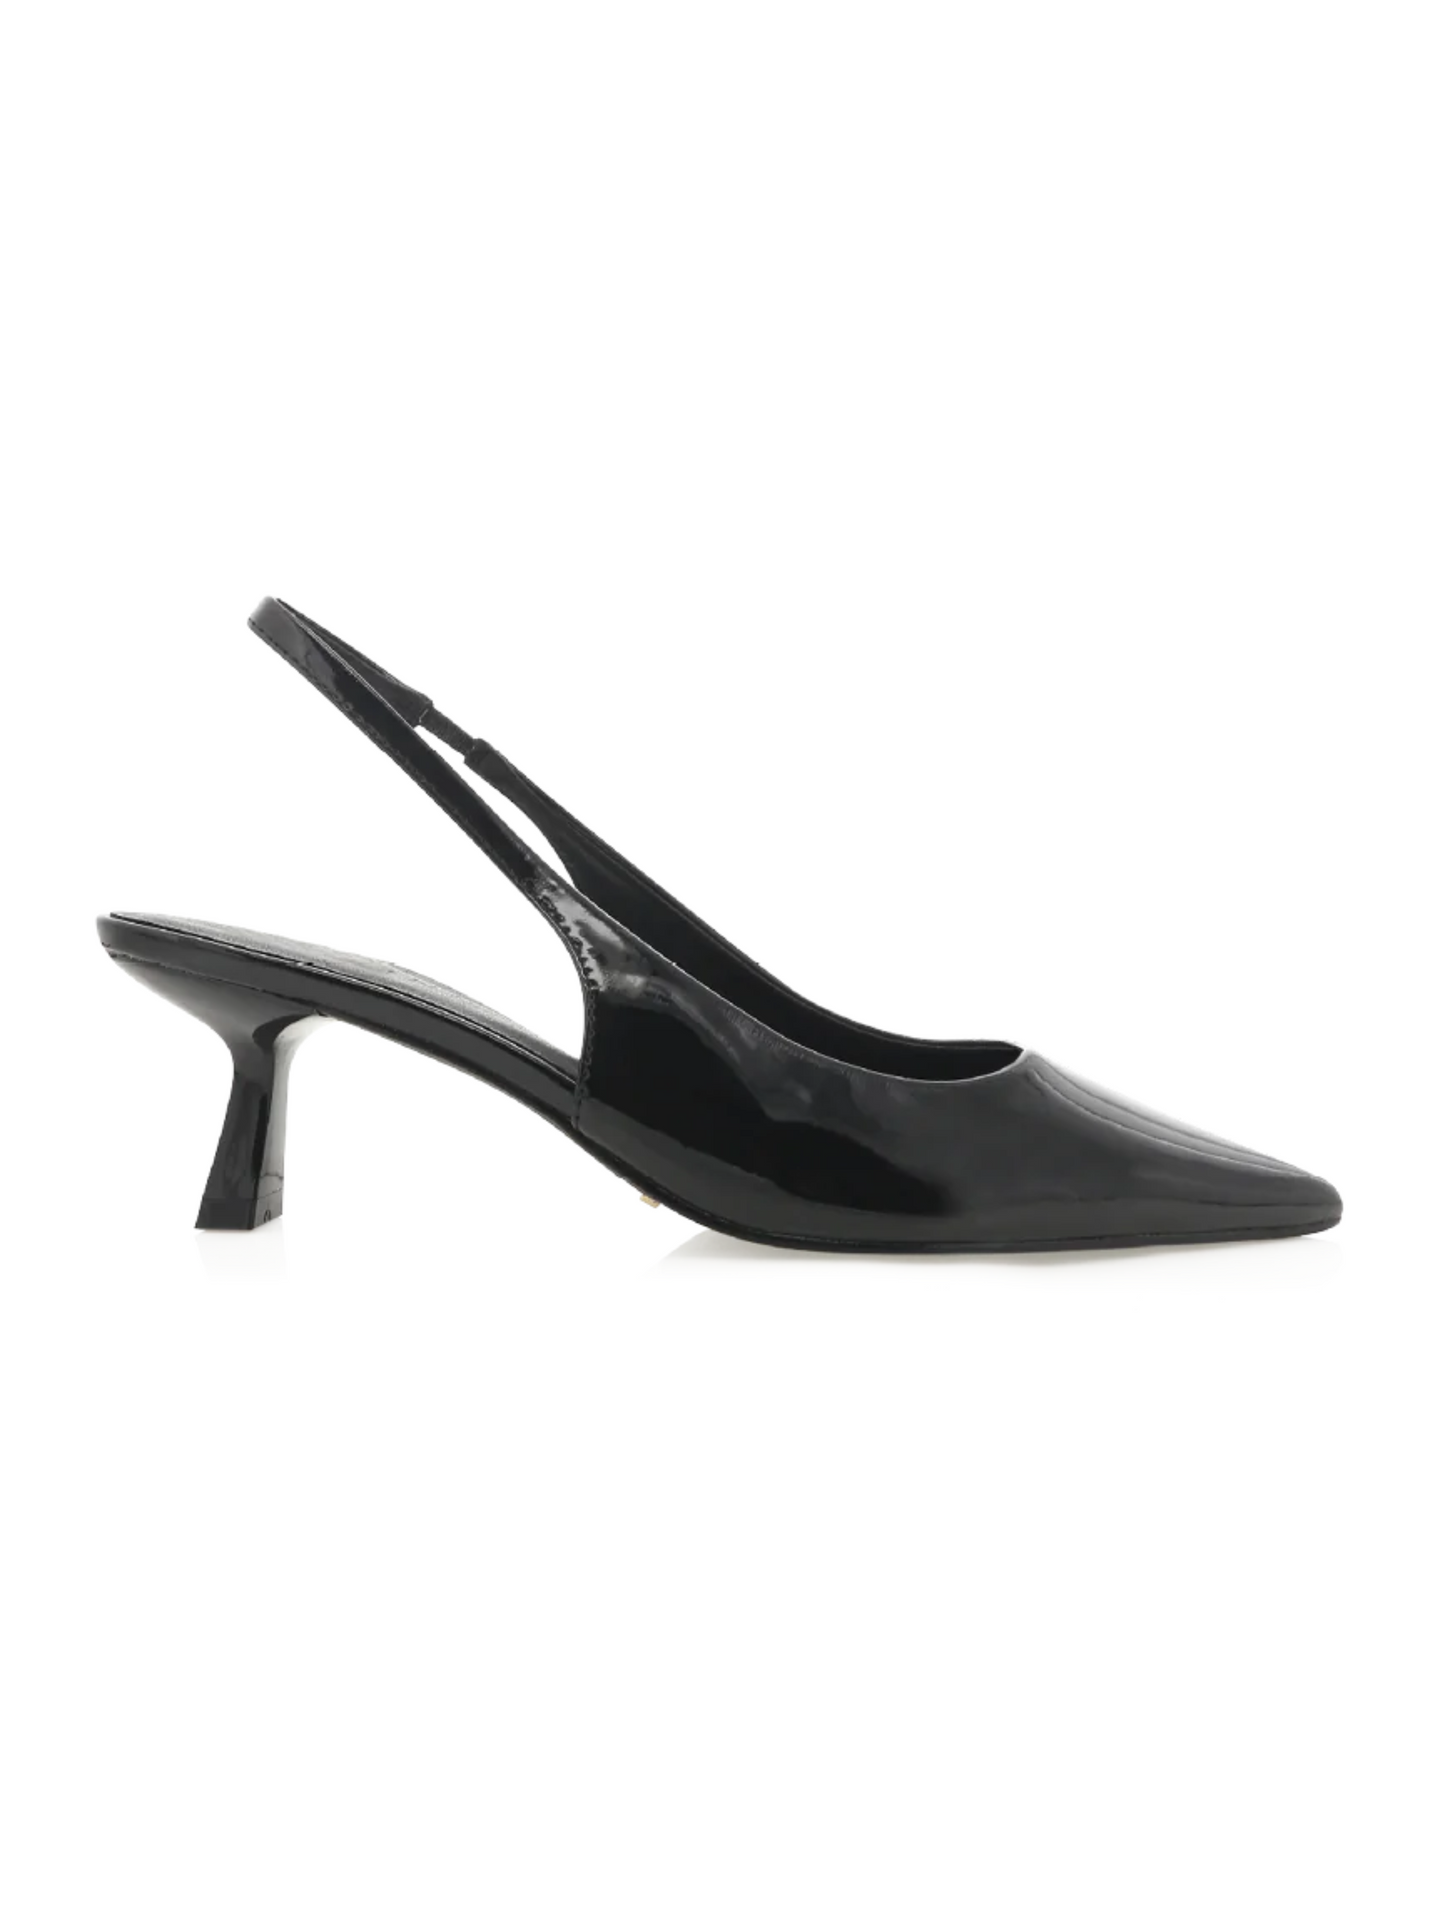 BILLINI AYLA POINTED PUMP IN BLACK PATENT - THE HIP EAGLE BOUTIQUE